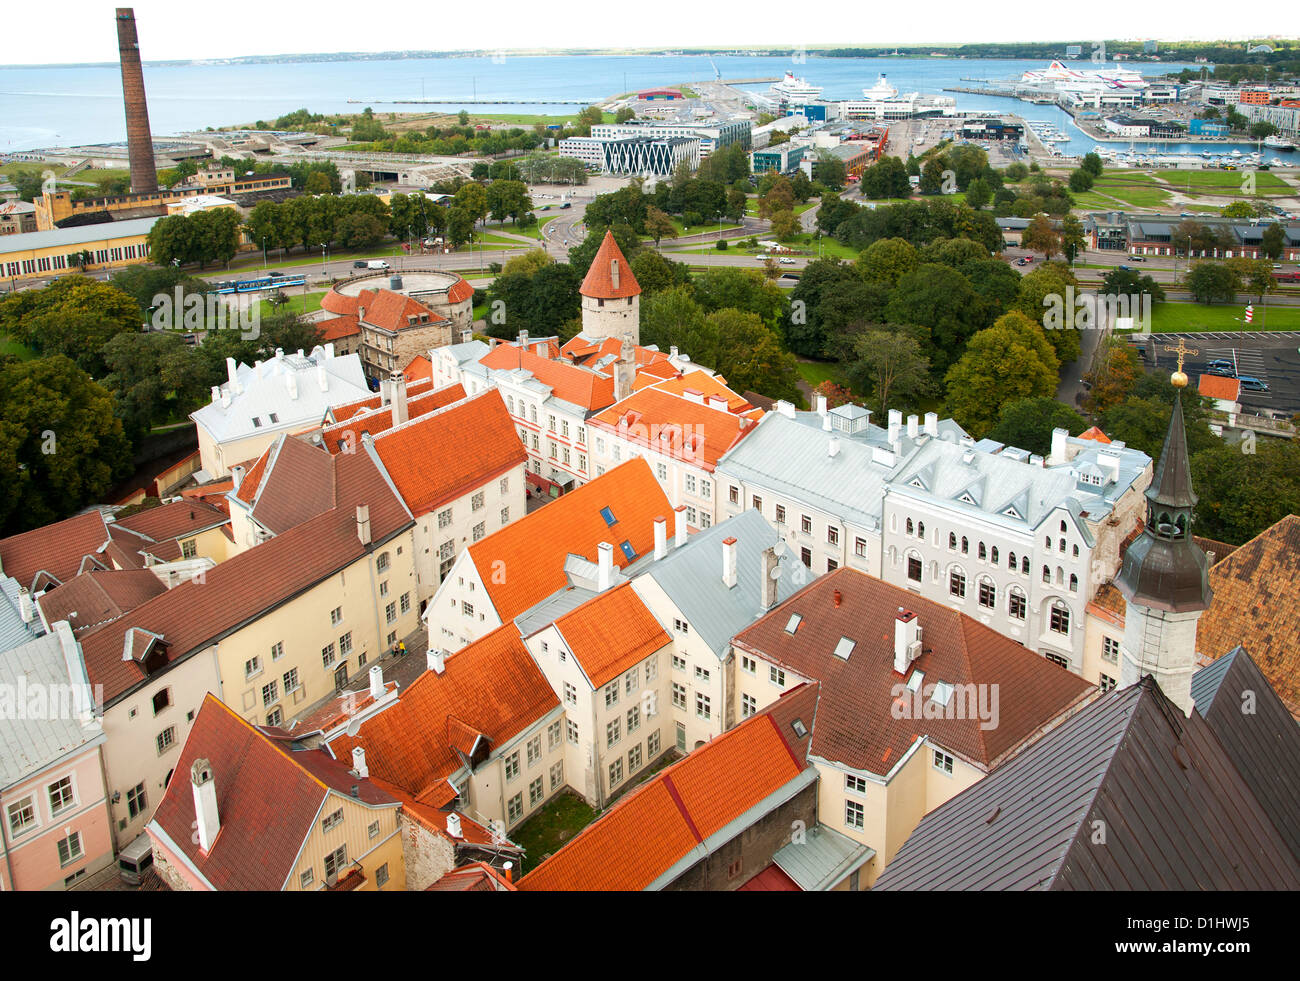 Rooftops of the old town in Tallinn, the capital of Estonia. In the background is the port of Tallinn. Stock Photo